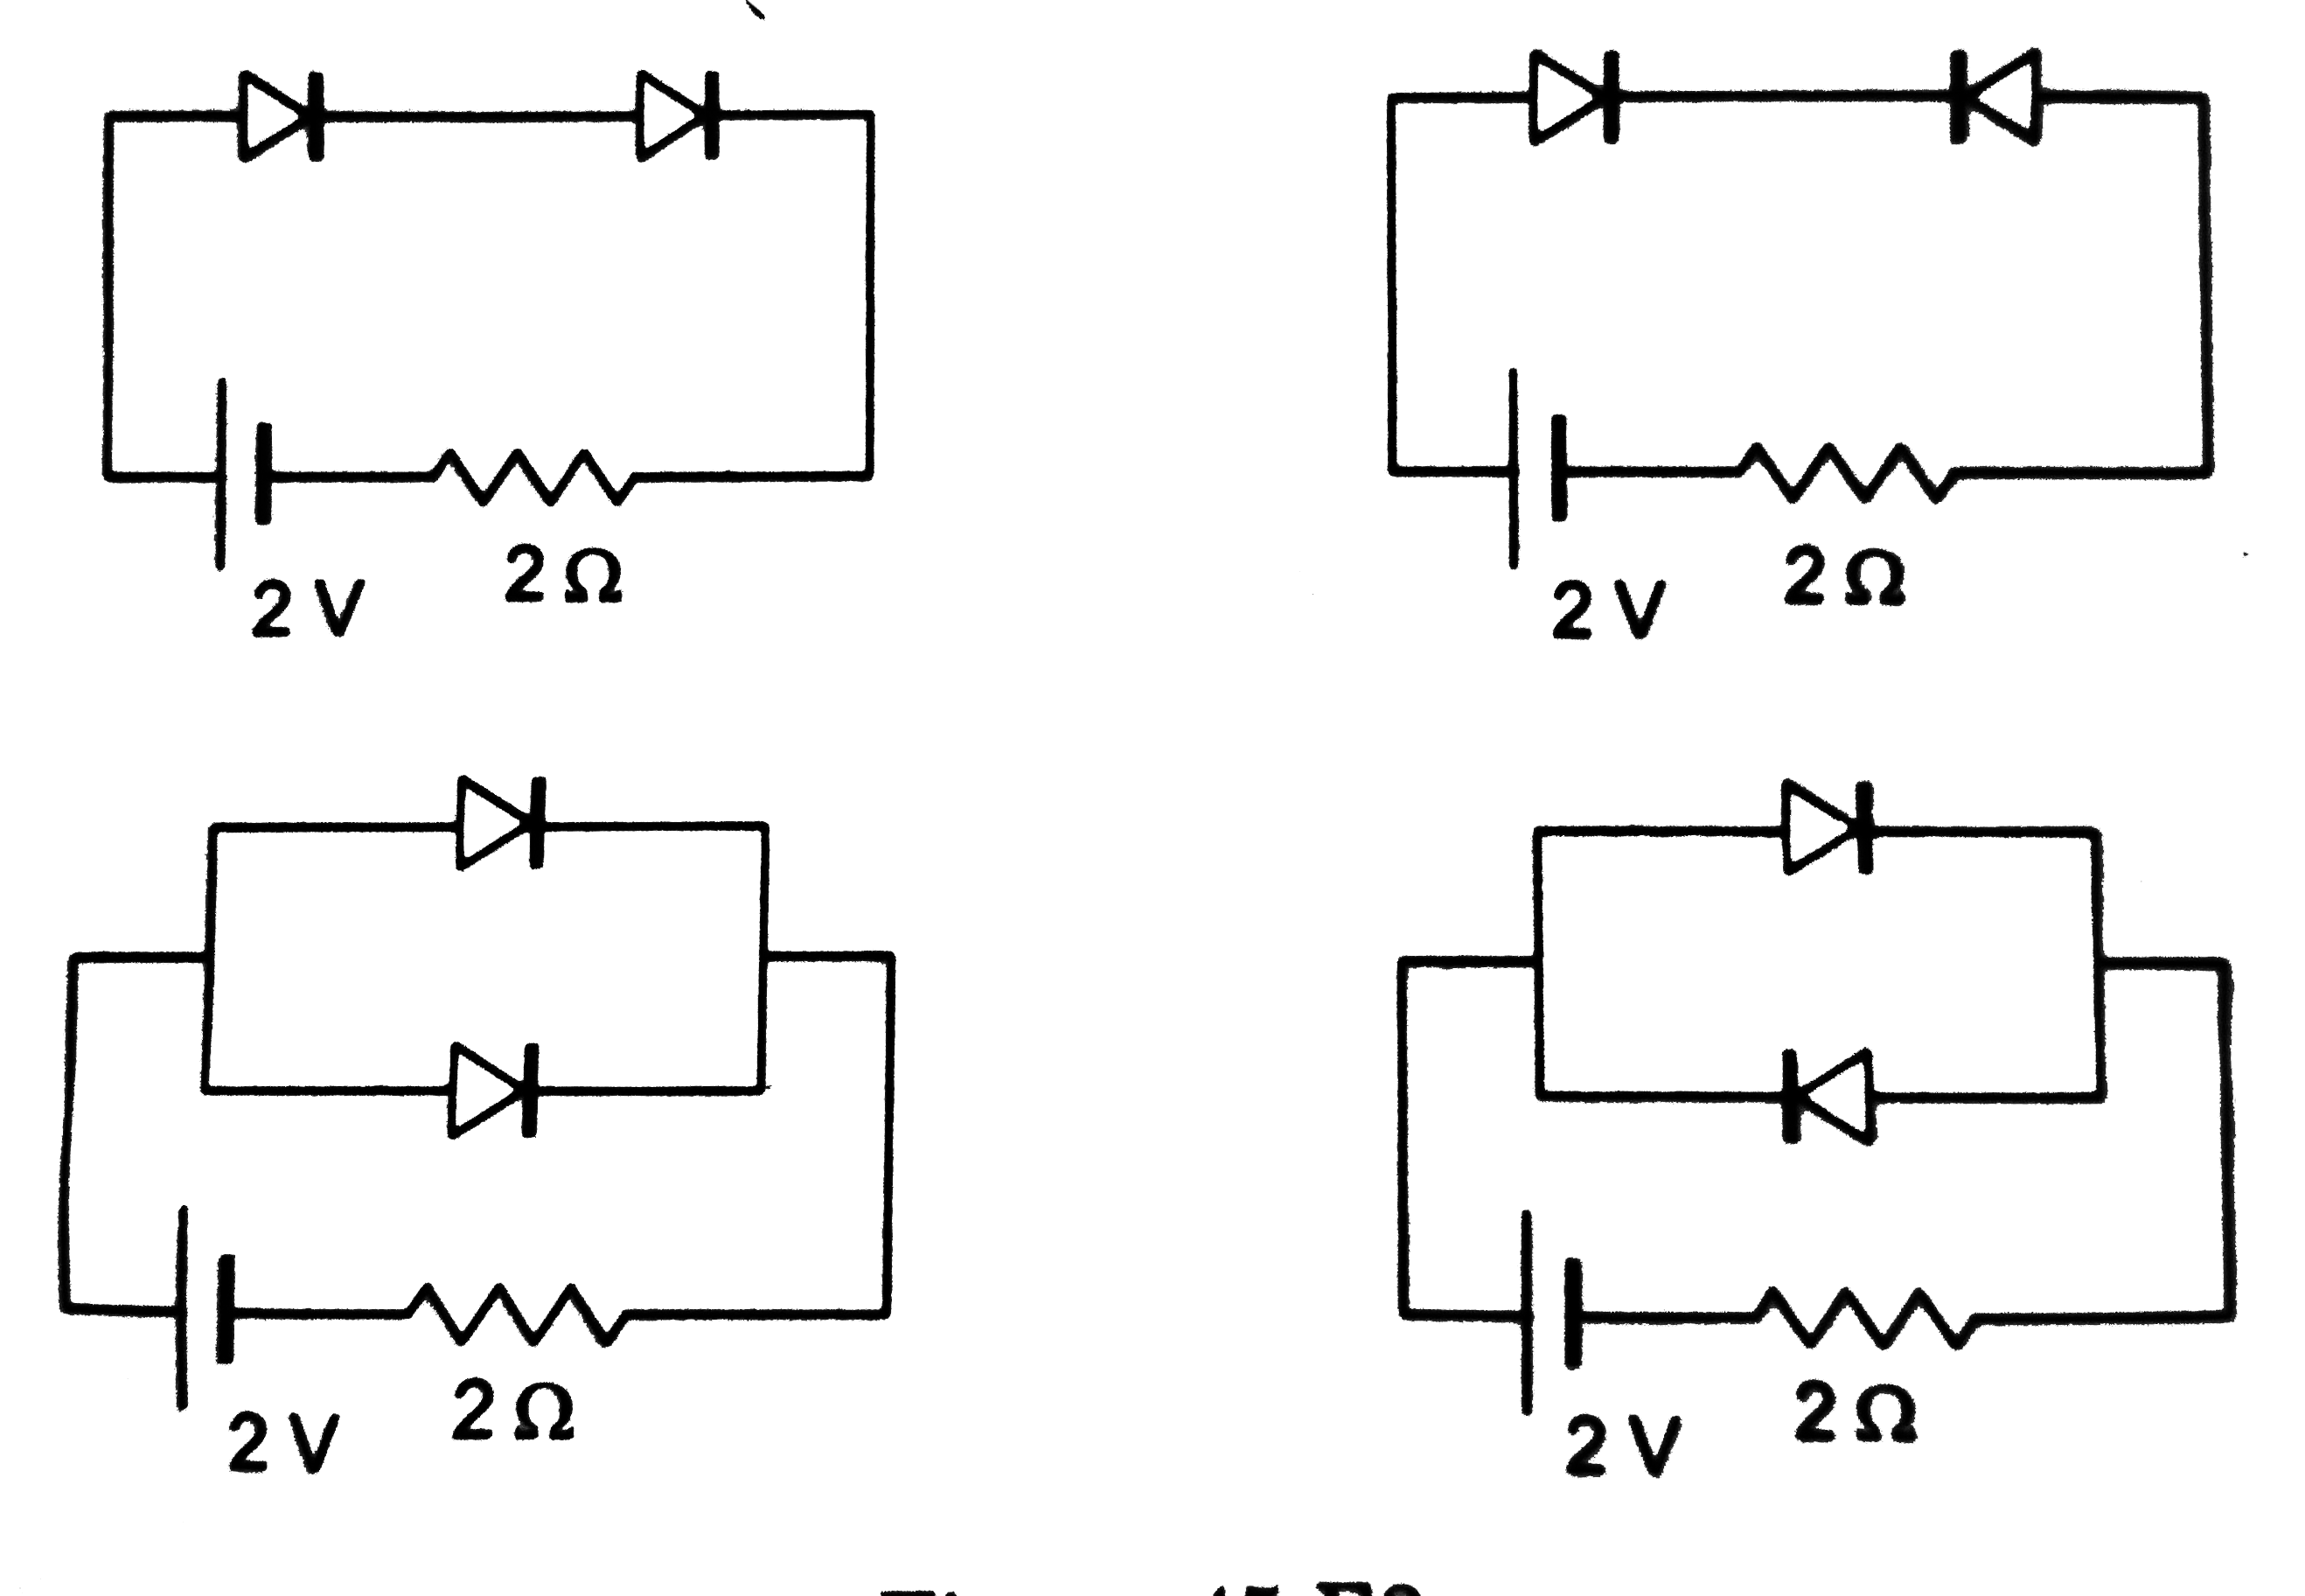 Find the current through the resistance in the circuits shown in figure